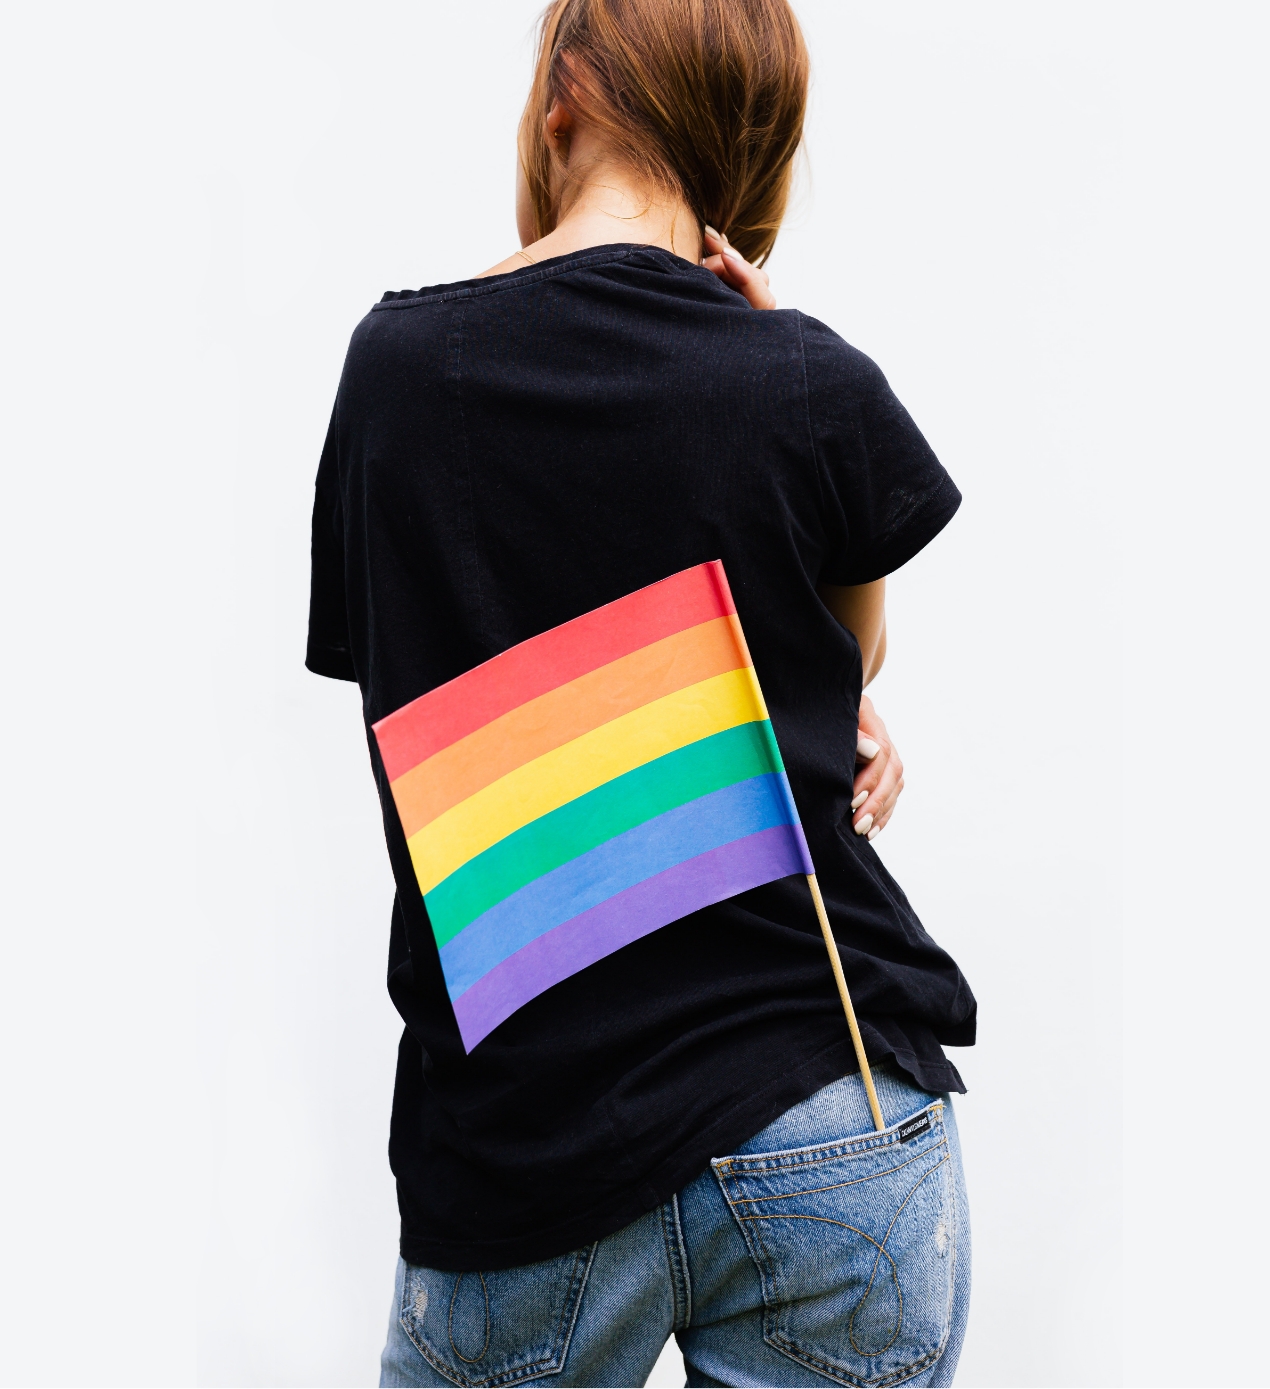 Girl wearing black t-shirt and jeans with a pride flag in her pocket